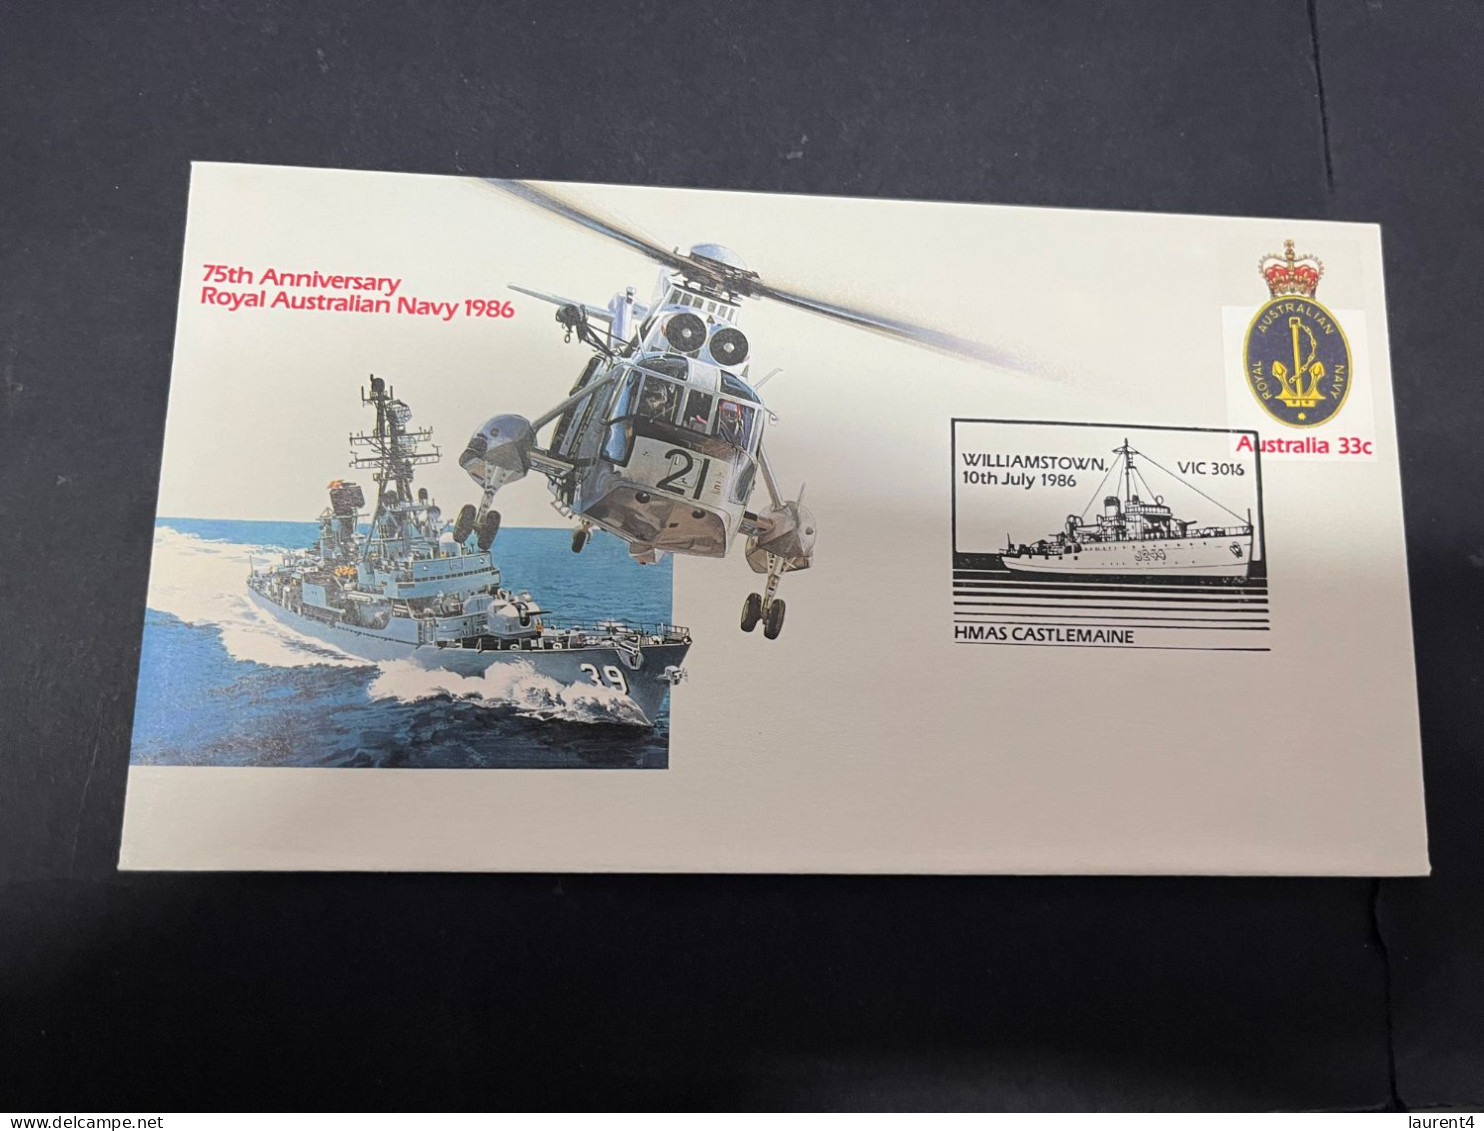 17-4-2024 (2 X 19) Australia - 1986 - 75th Anniversary Of The Royal Australian Navy (2 Covers) - Premiers Jours (FDC)